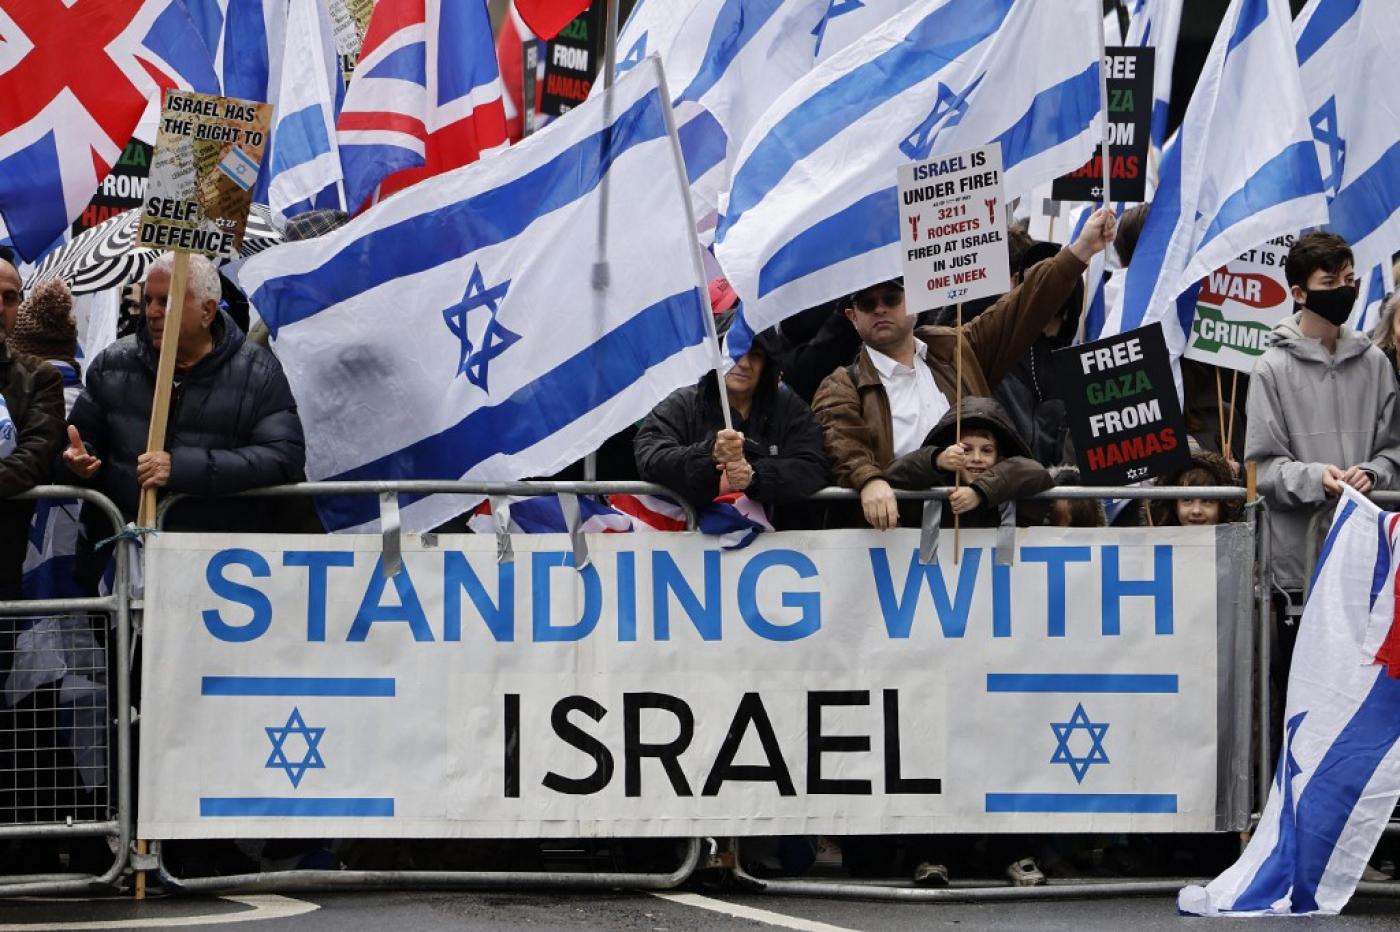 How Britain’s Conservatives became unconditional supporters of Israel